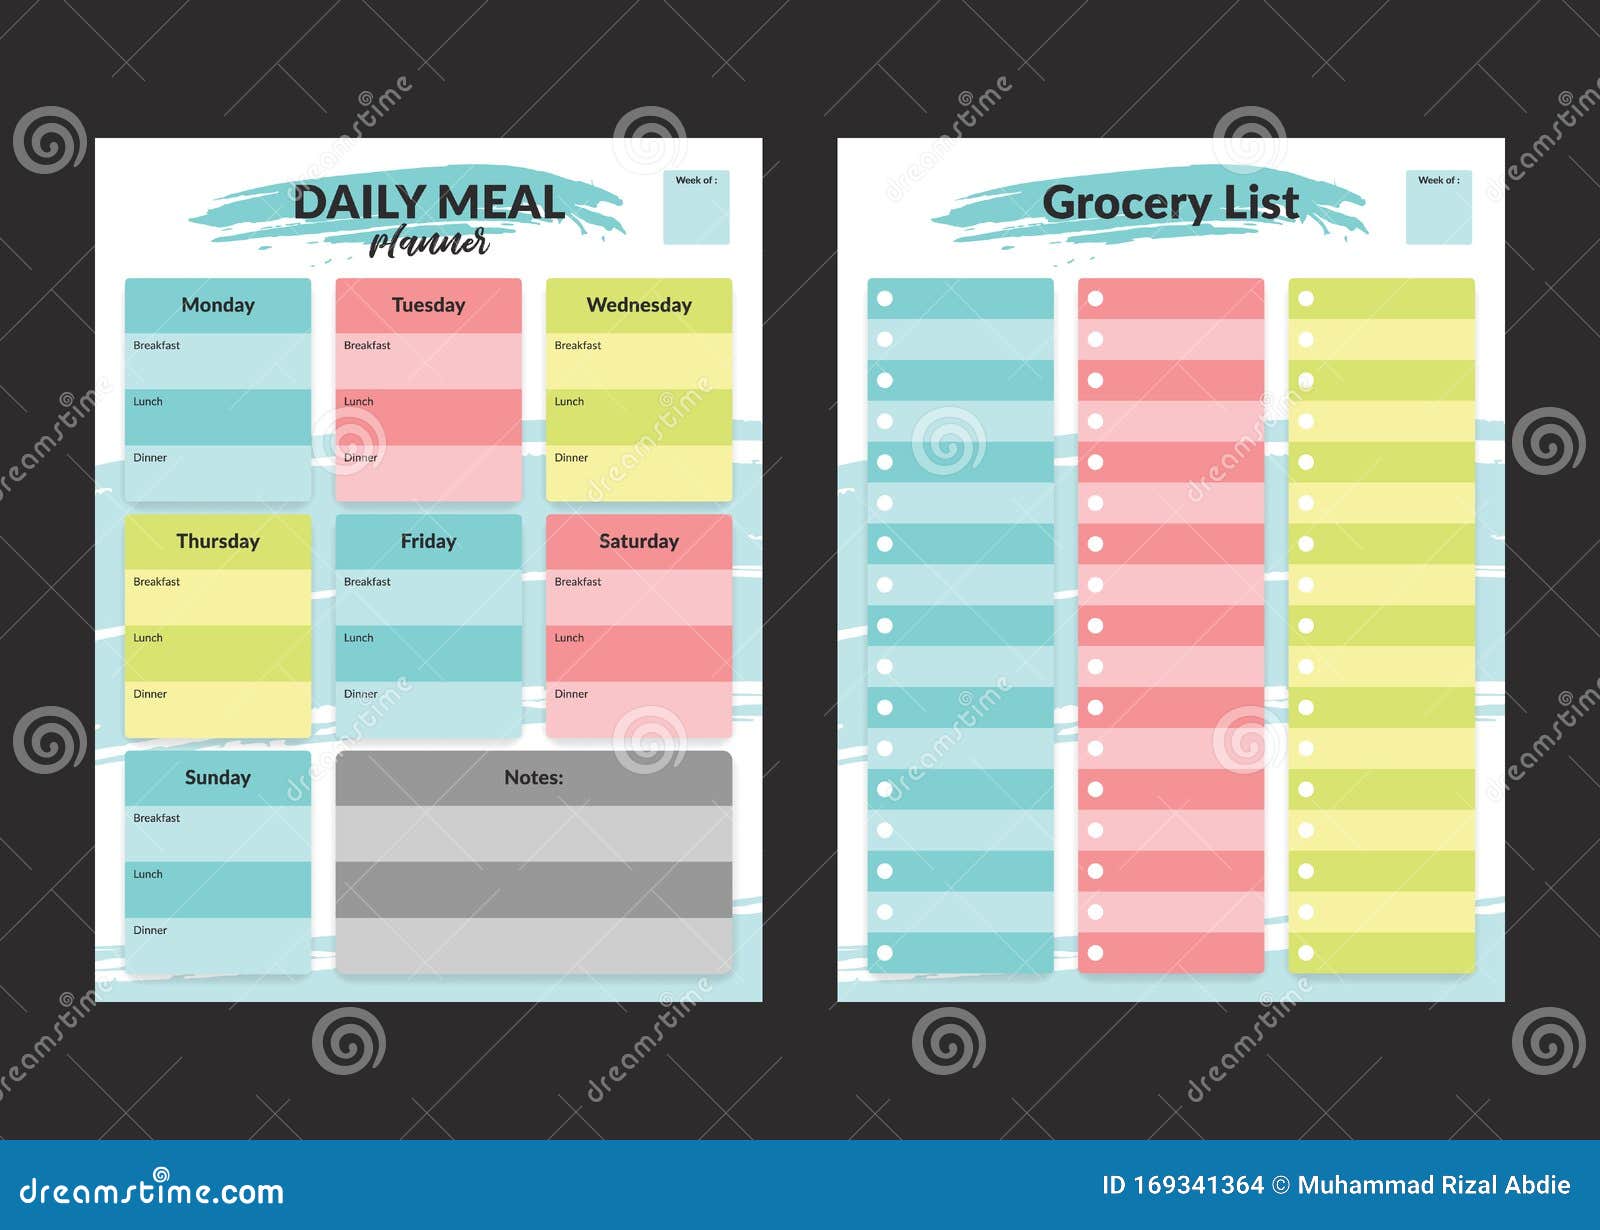 Menu Meal Planner and Grocery Shopping List Weekly Template for Throughout Menu Planner With Grocery List Template